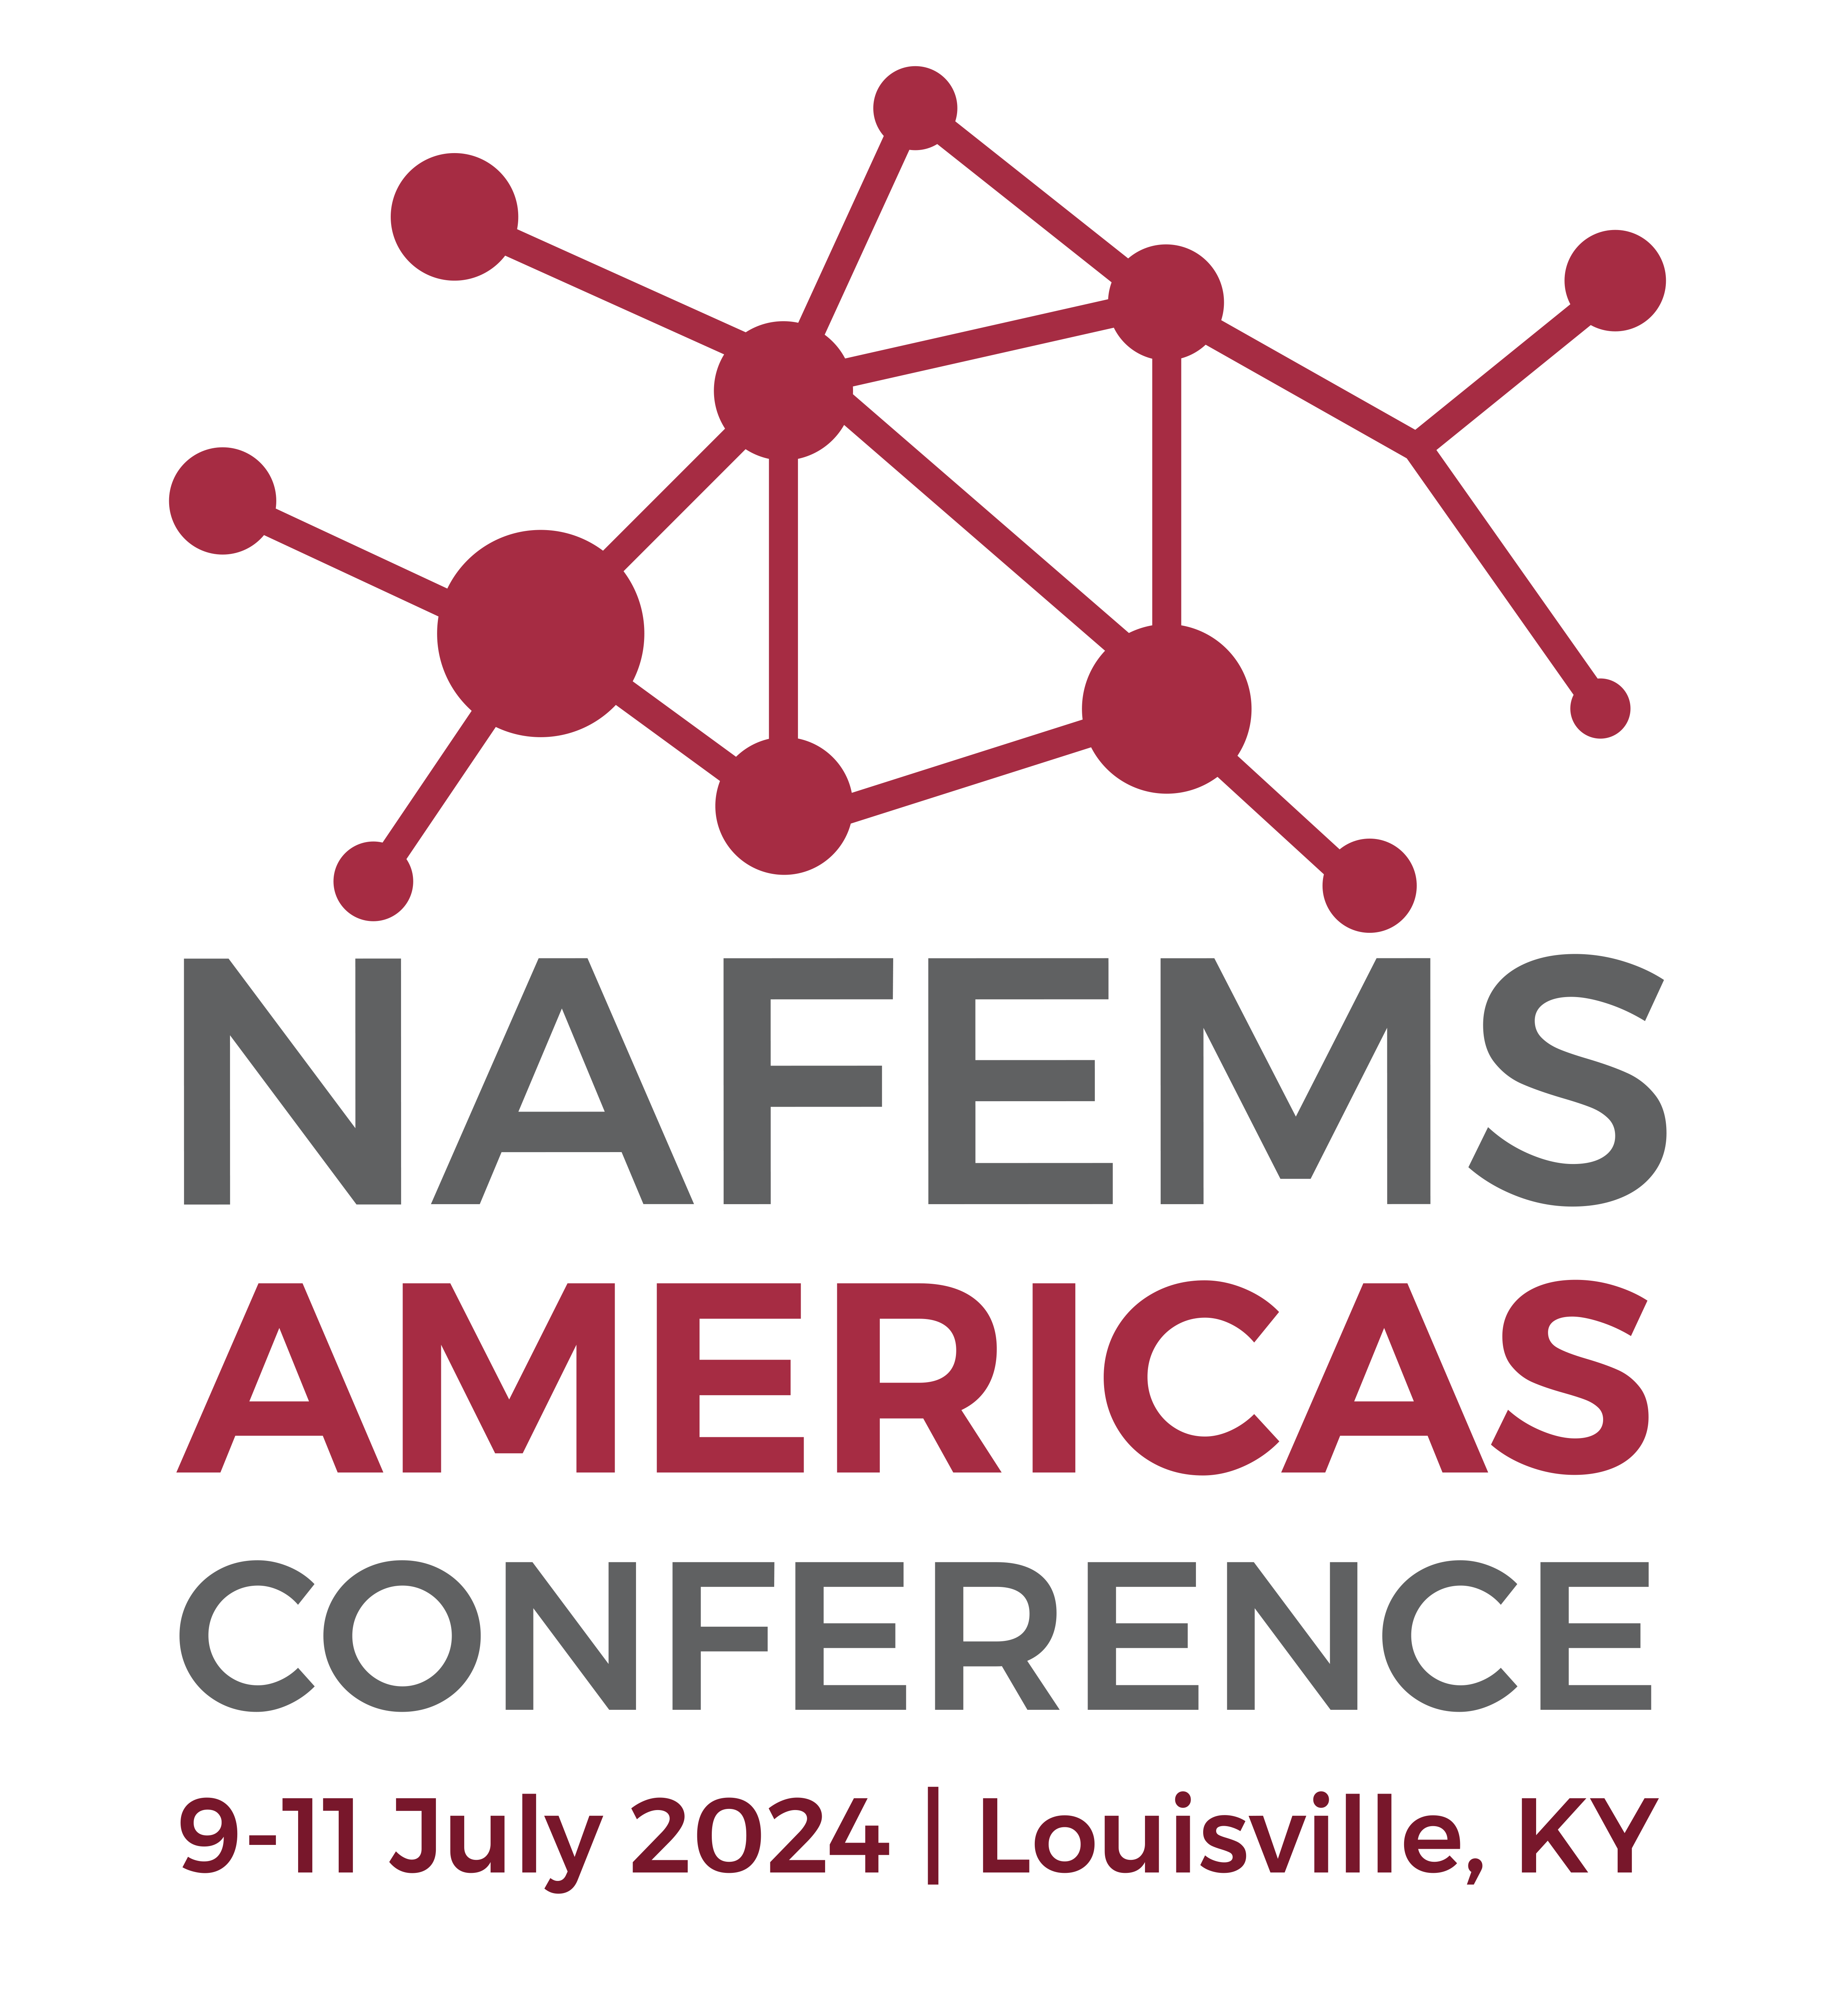 NAFEMS Americas Conference